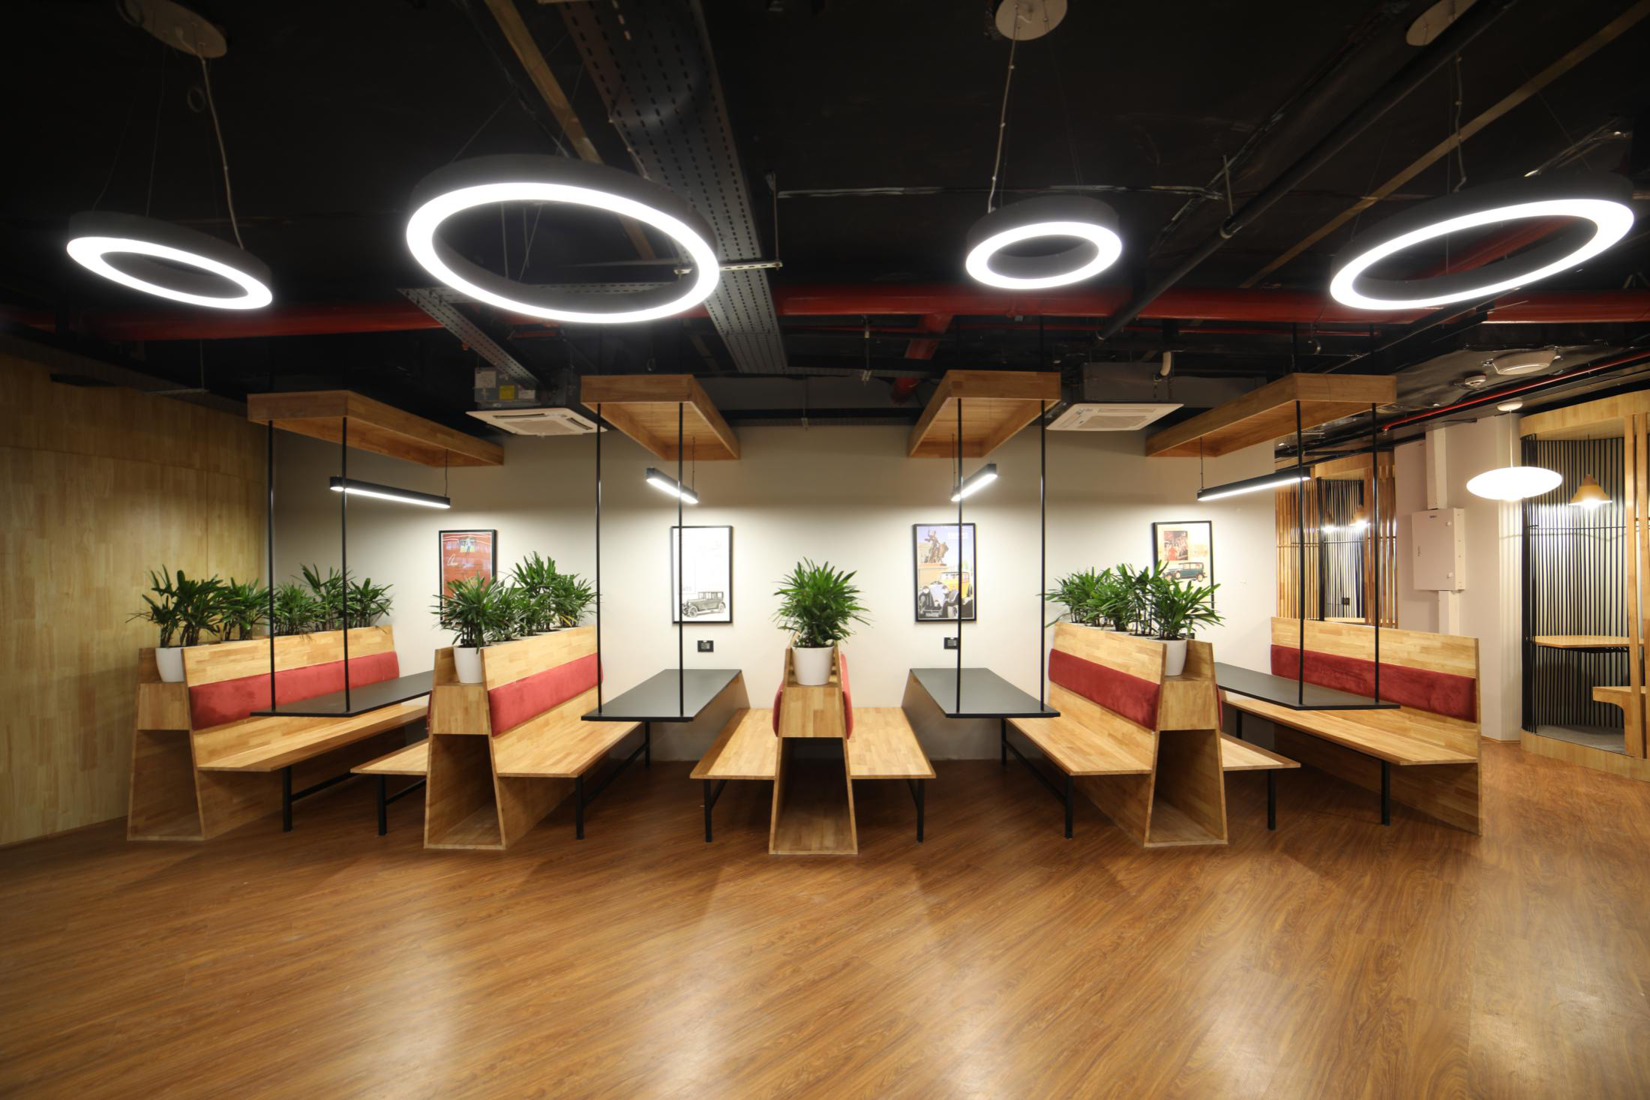 OYO Workspaces forays into Hyderabad with 700-seater Innov8 centre